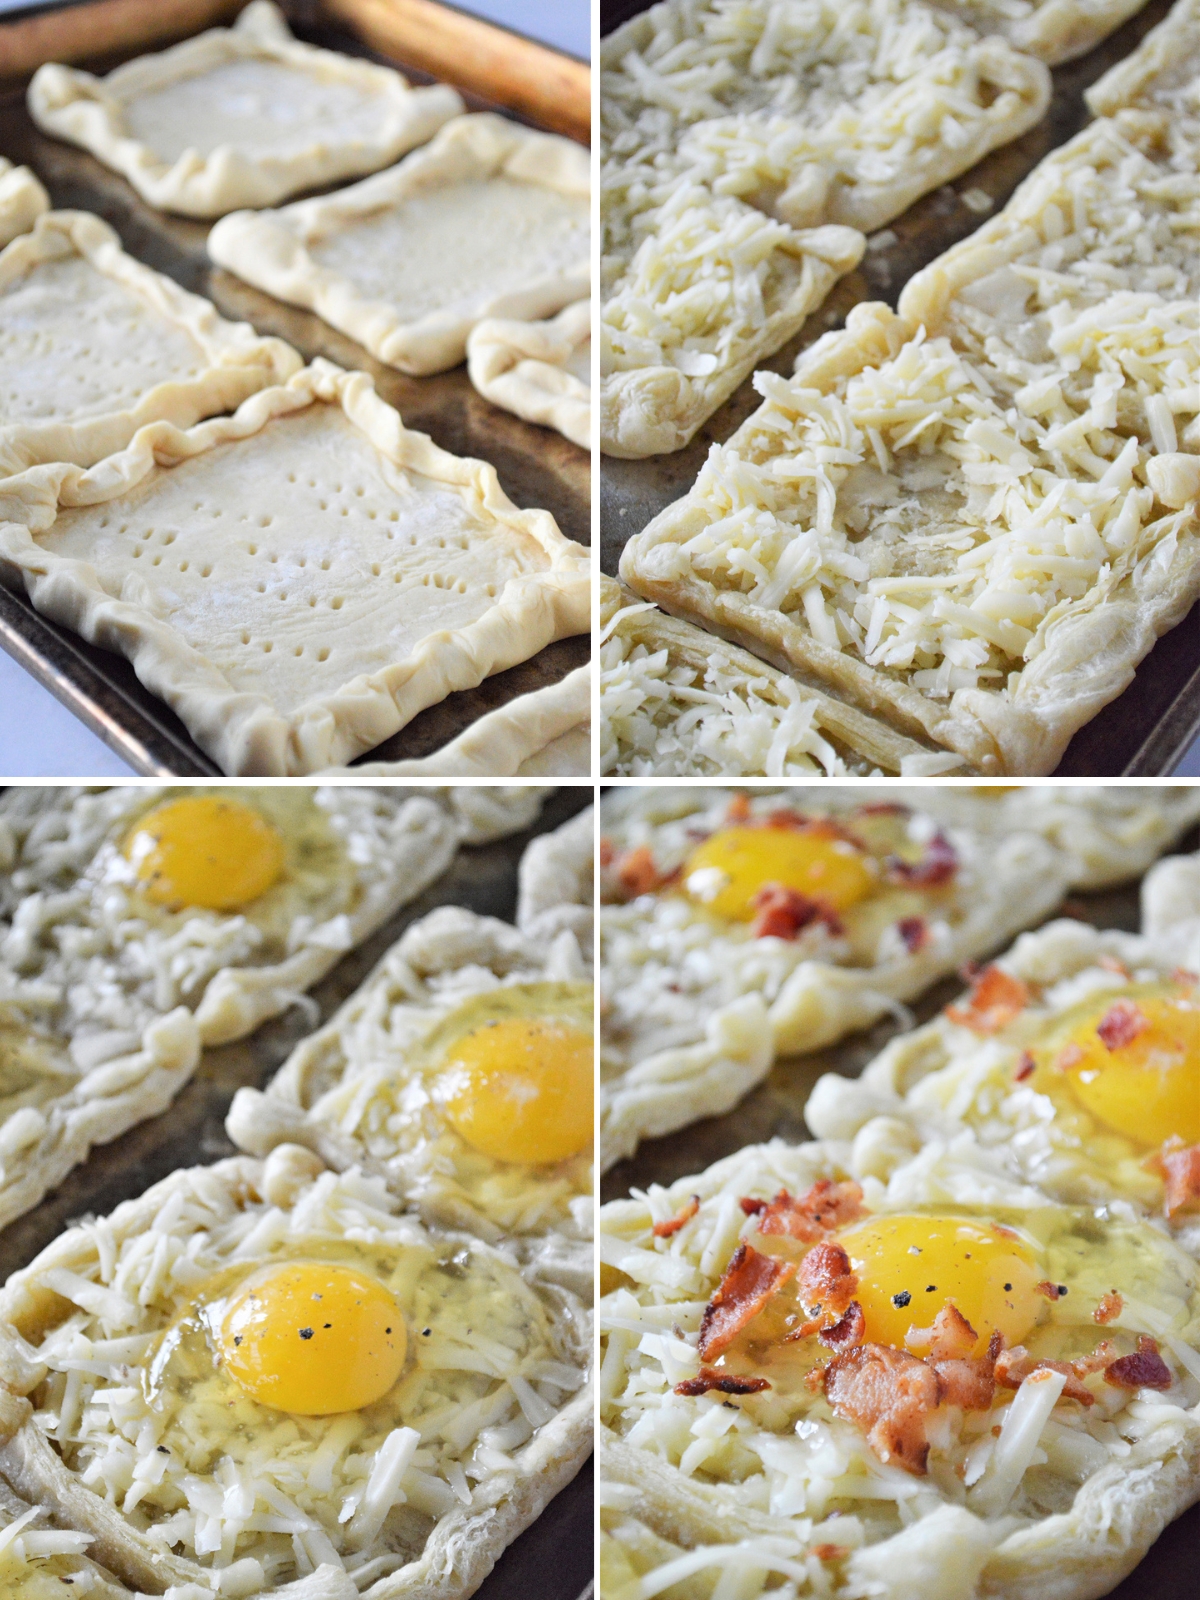 making baked eggs on puff pastry on a baking sheet